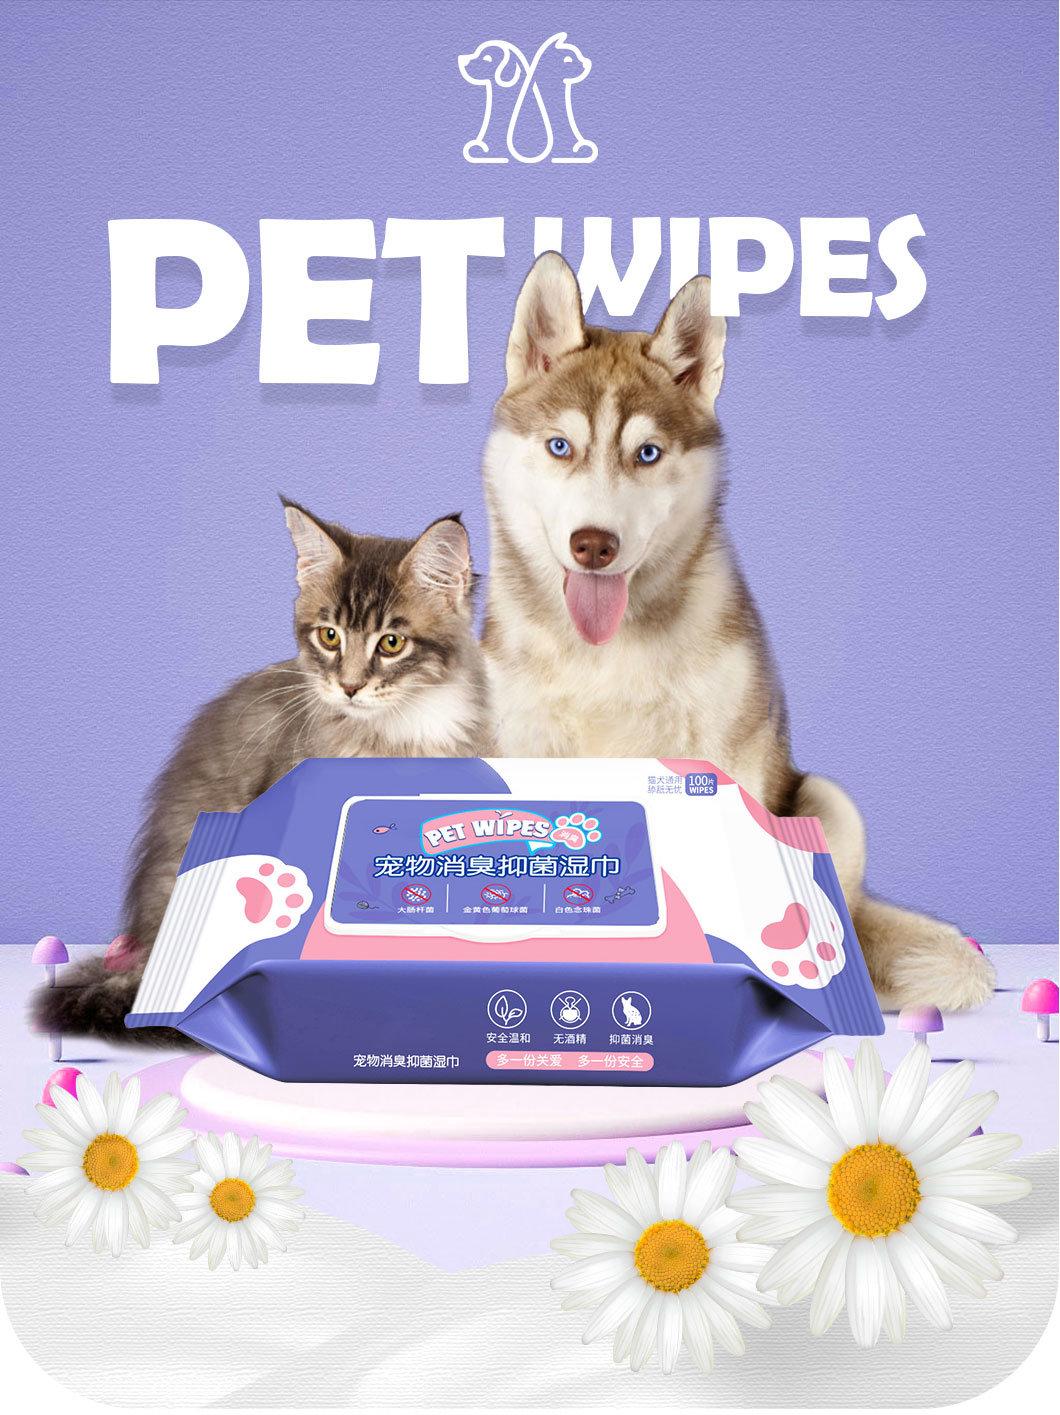 100 PCS Pets Cleaning Wipes Suitable for All Pets, Remove Dirty Sanitary Specialized Pet Wipes Safe and Mild Formula OEM Accepted Clean Wipes Anti Bacteria